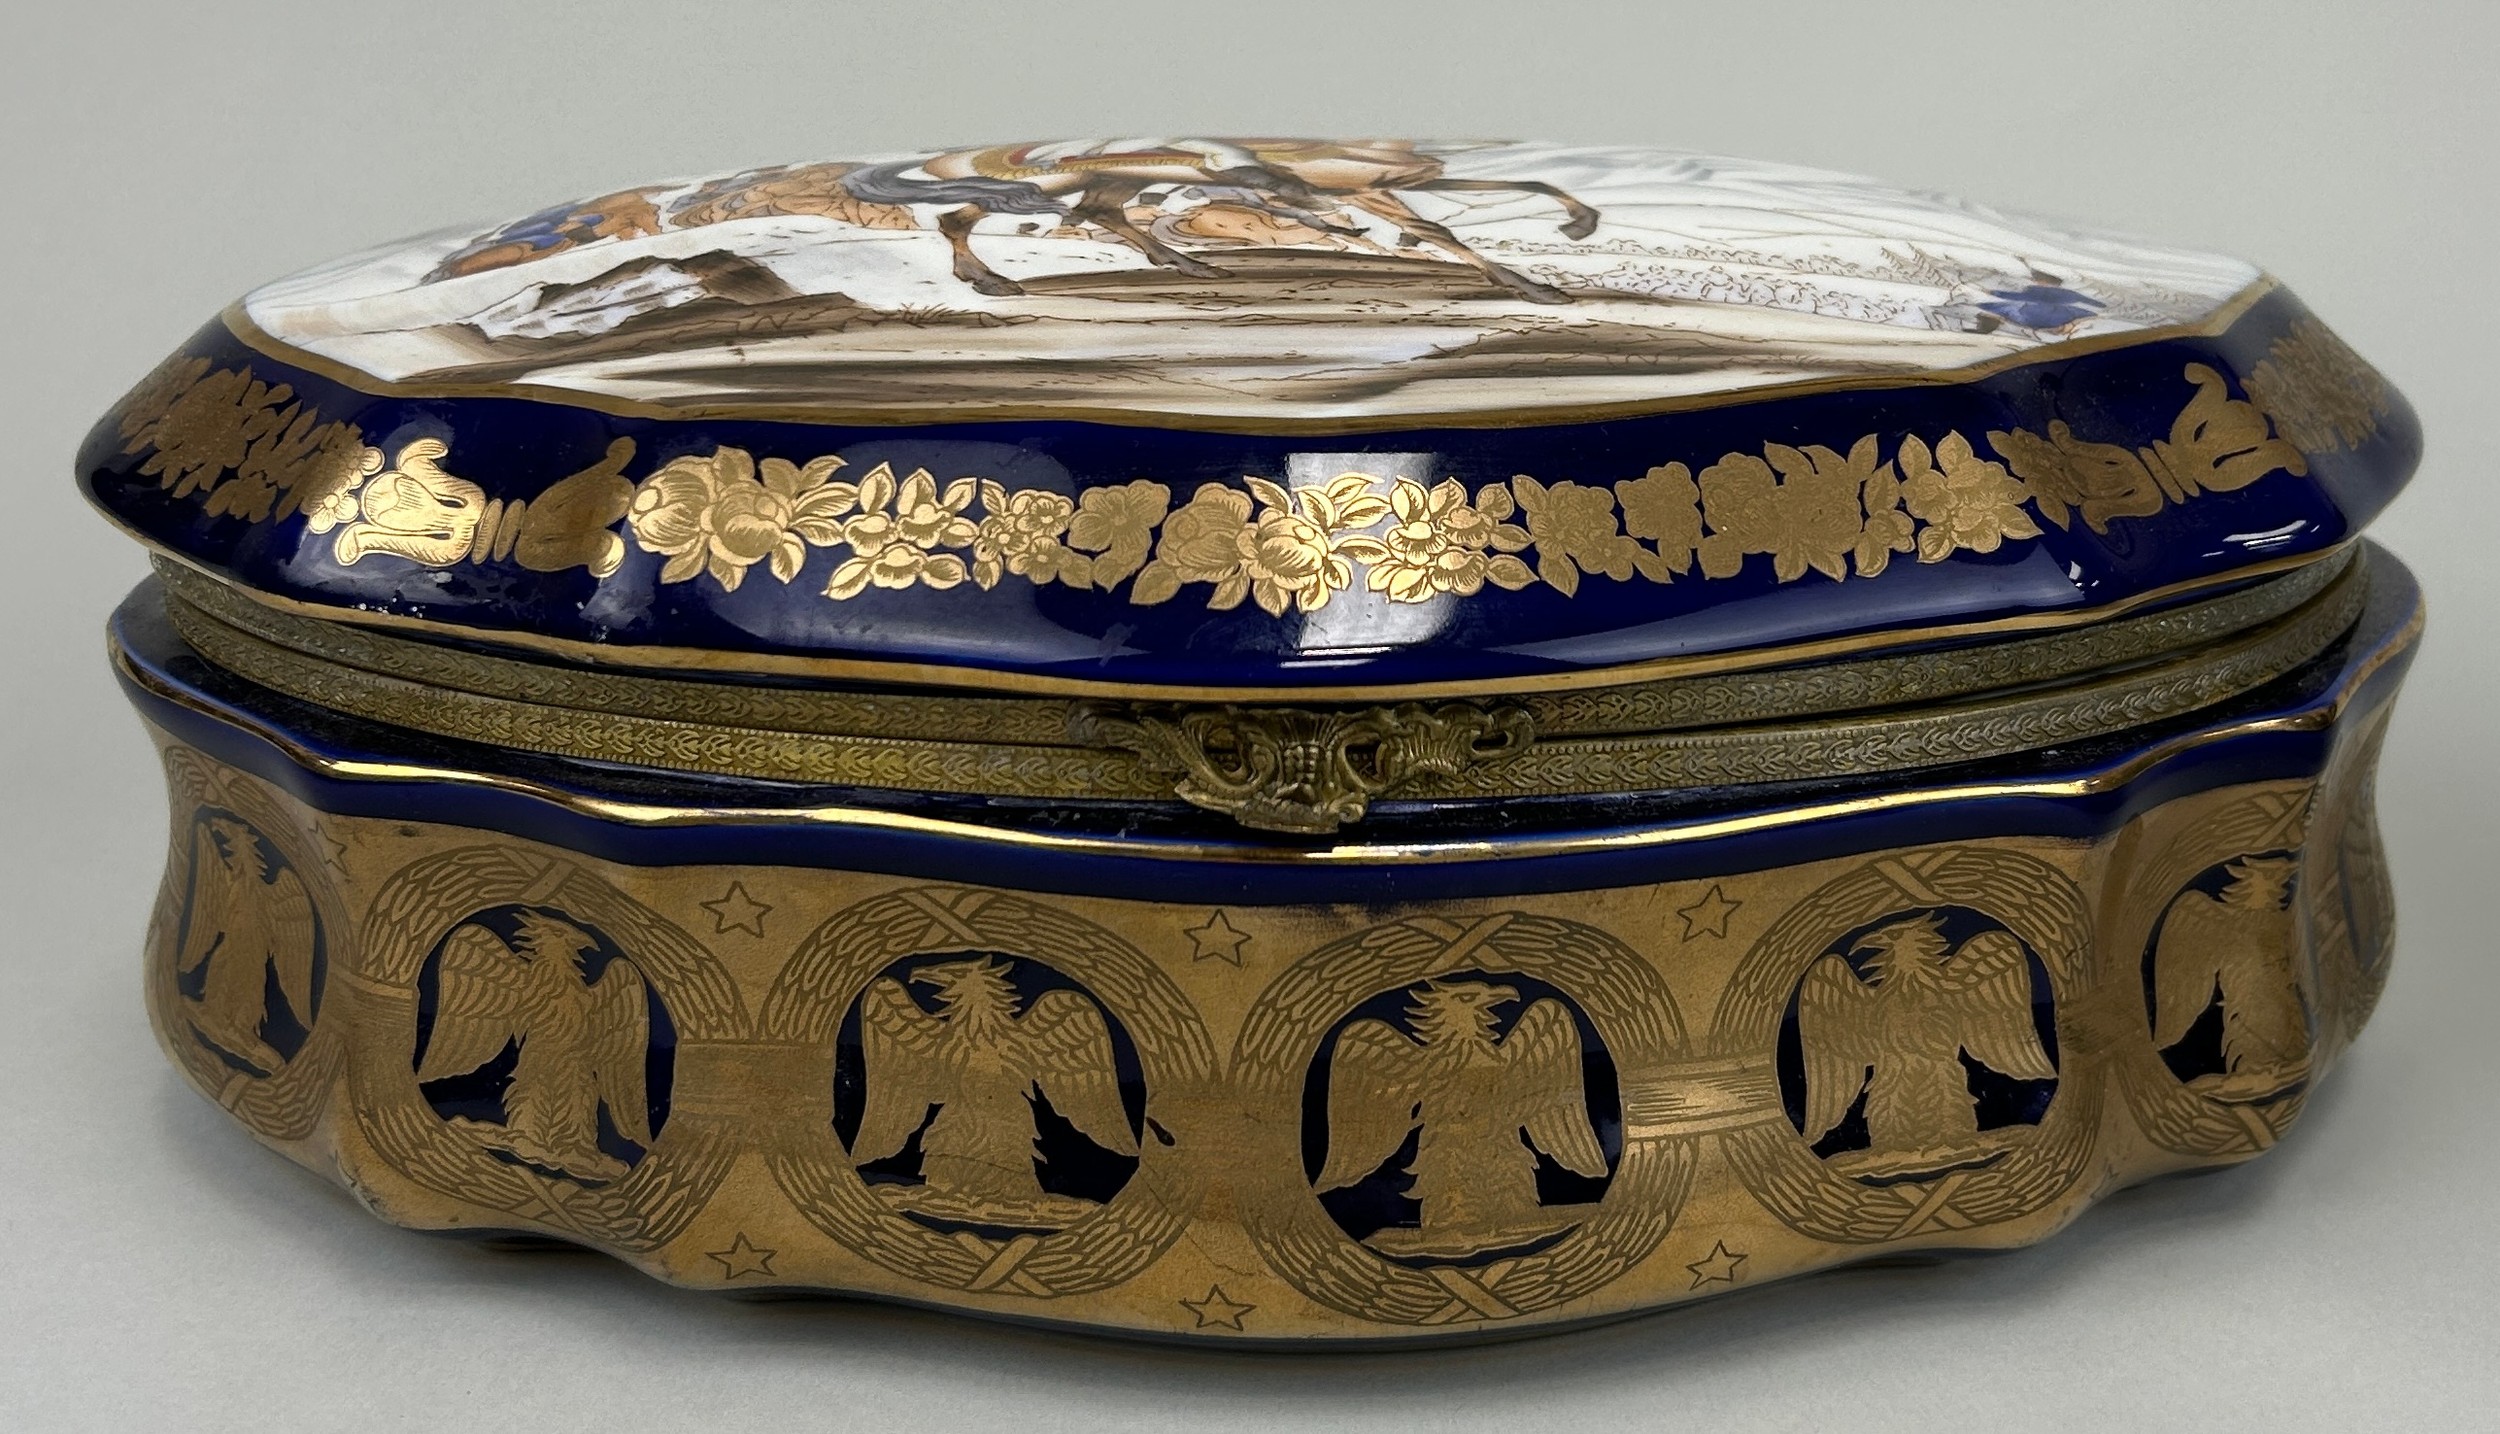 AFTER SEVRES: A SEVRES STYLE PORCELAIN BOX DECORATED WITH A HORSE AND RIDER, WITH GILT EAGLES. - Image 2 of 5